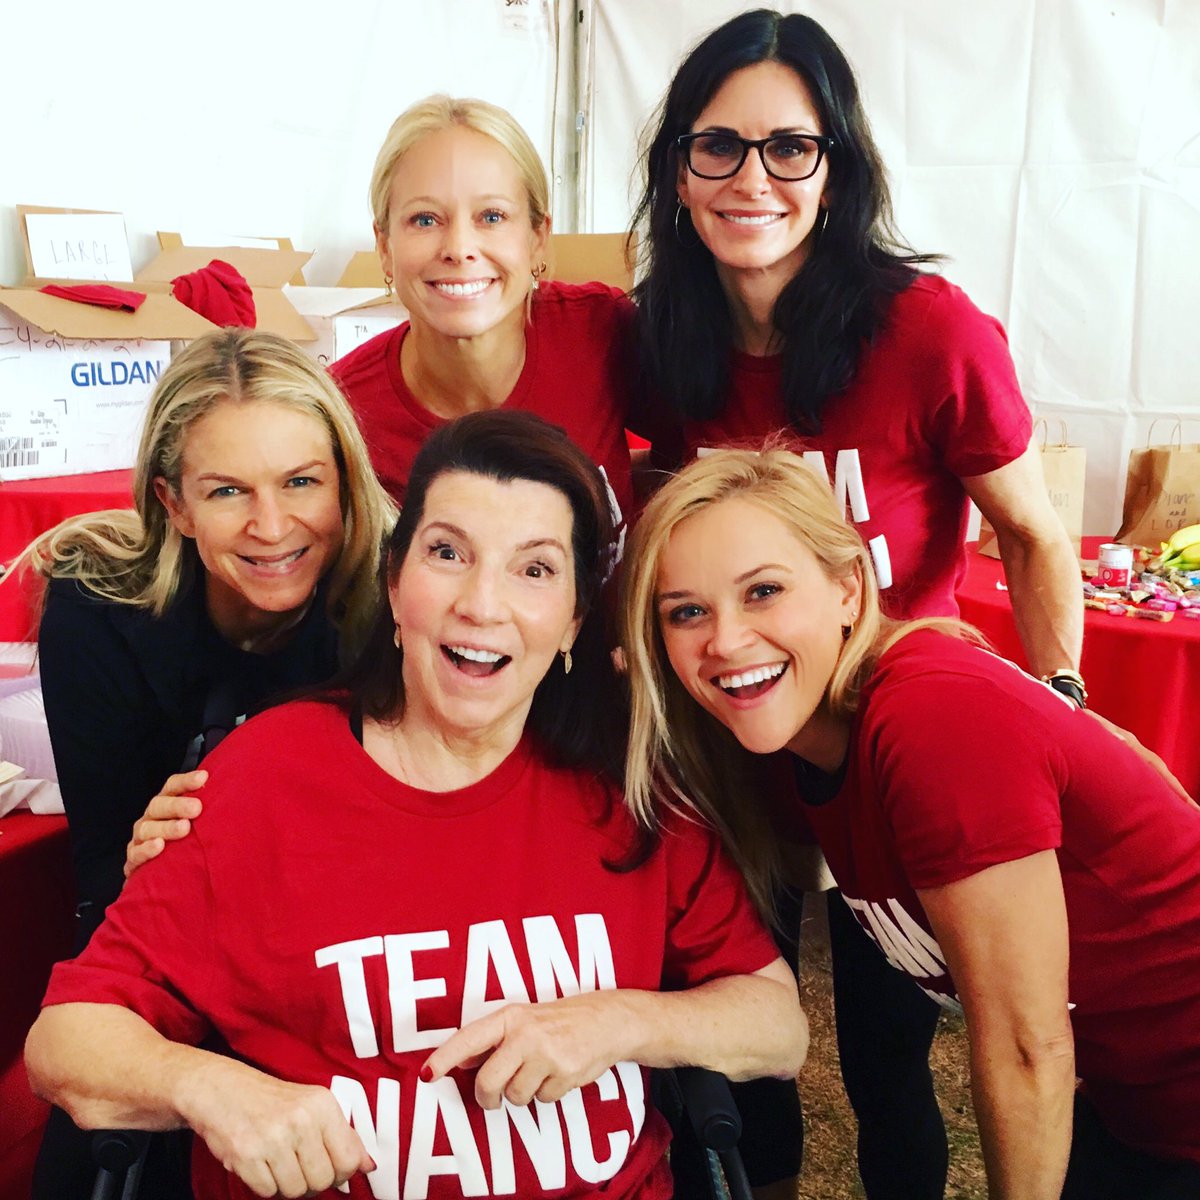 Walking today to support #ALS research, with our friend Nanci Ryder who we love so much! #FindACure #TeamNanci https://t.co/ZP7MFsL5EX